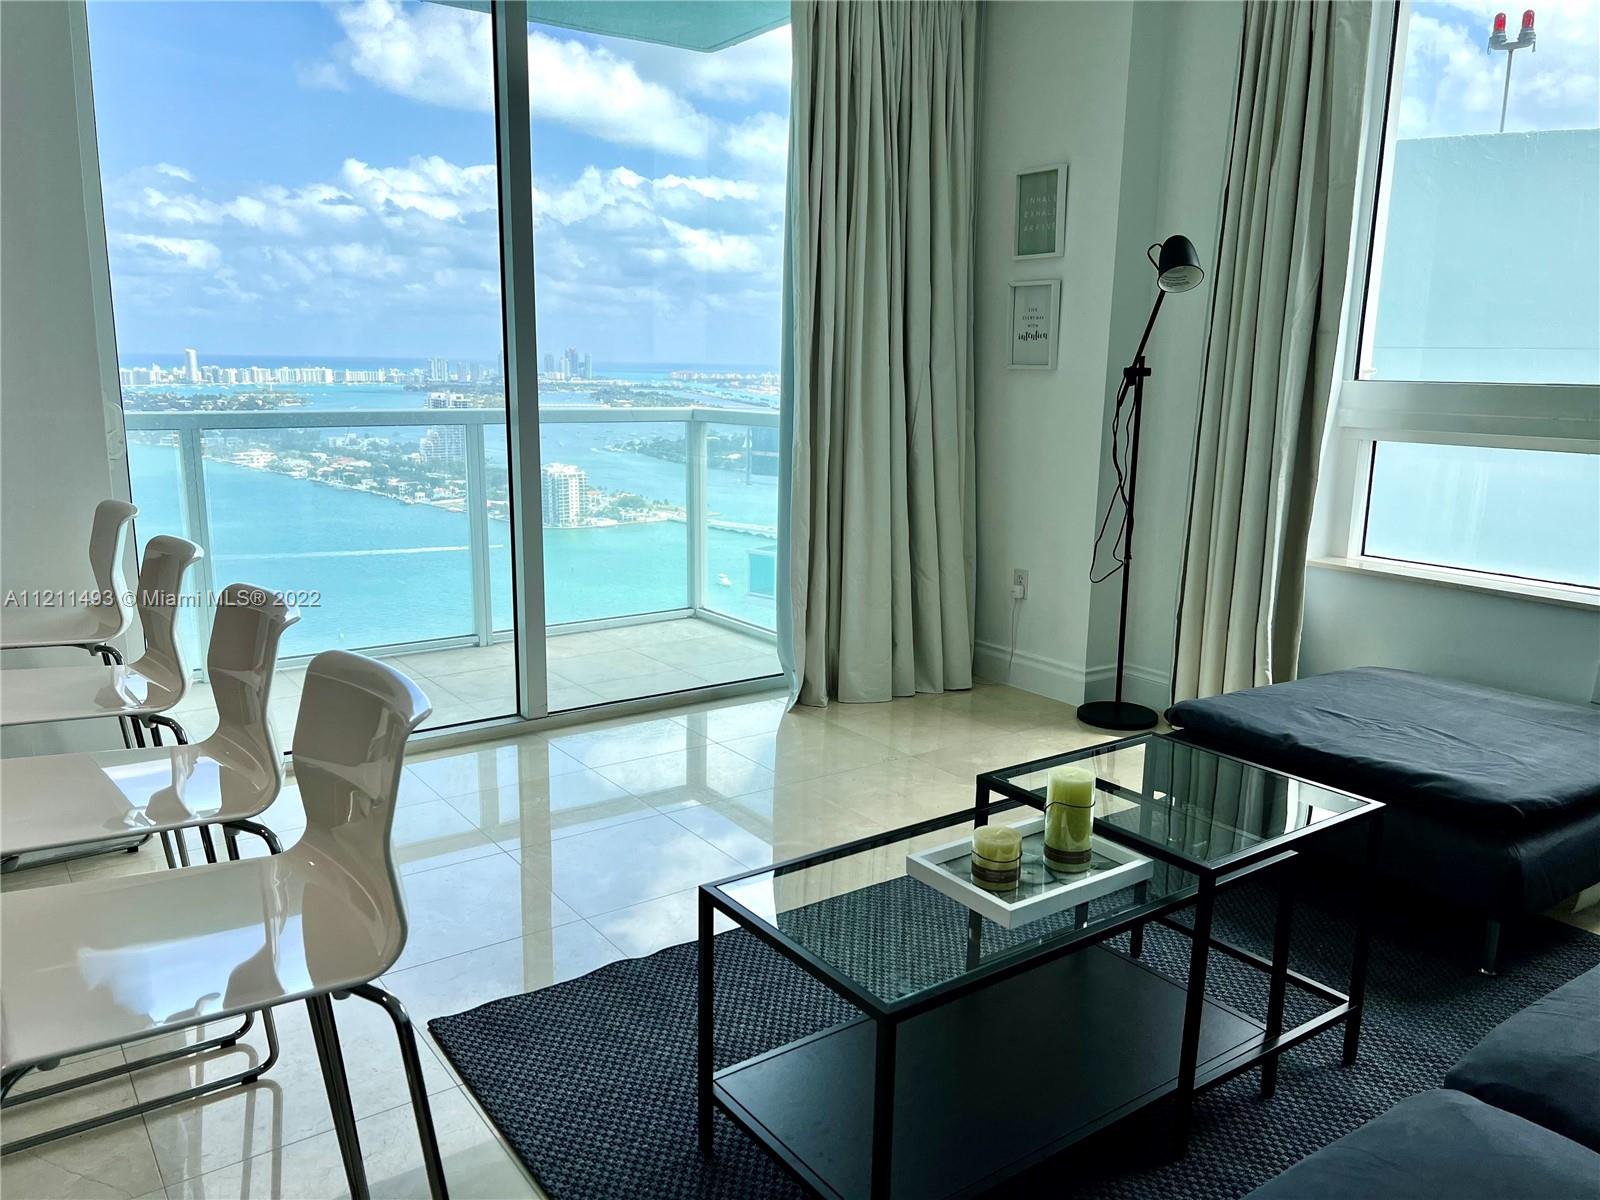 Enjoy breathtaking, unobstructed bay and Miami Beach views from this 40th floor 1 bed / 1 bath at Quantum on the Bay. This unit features an open floor plan, with views from every window. Quantum offers hotel style amenities: pool, lounge, movie theater, convenience store, secured lobby with concierge, fitness center, and much more! Conveniently located in the heart of Edgewater directly across the street from Margaret Pace Park, various cafes, and steps from the Venetian Causeway. Minutes to Miami Beach, Wynwood, Design District and Brickell. The unit is being rented full furnished, just bring your clothes and toothbrush. Won't last!